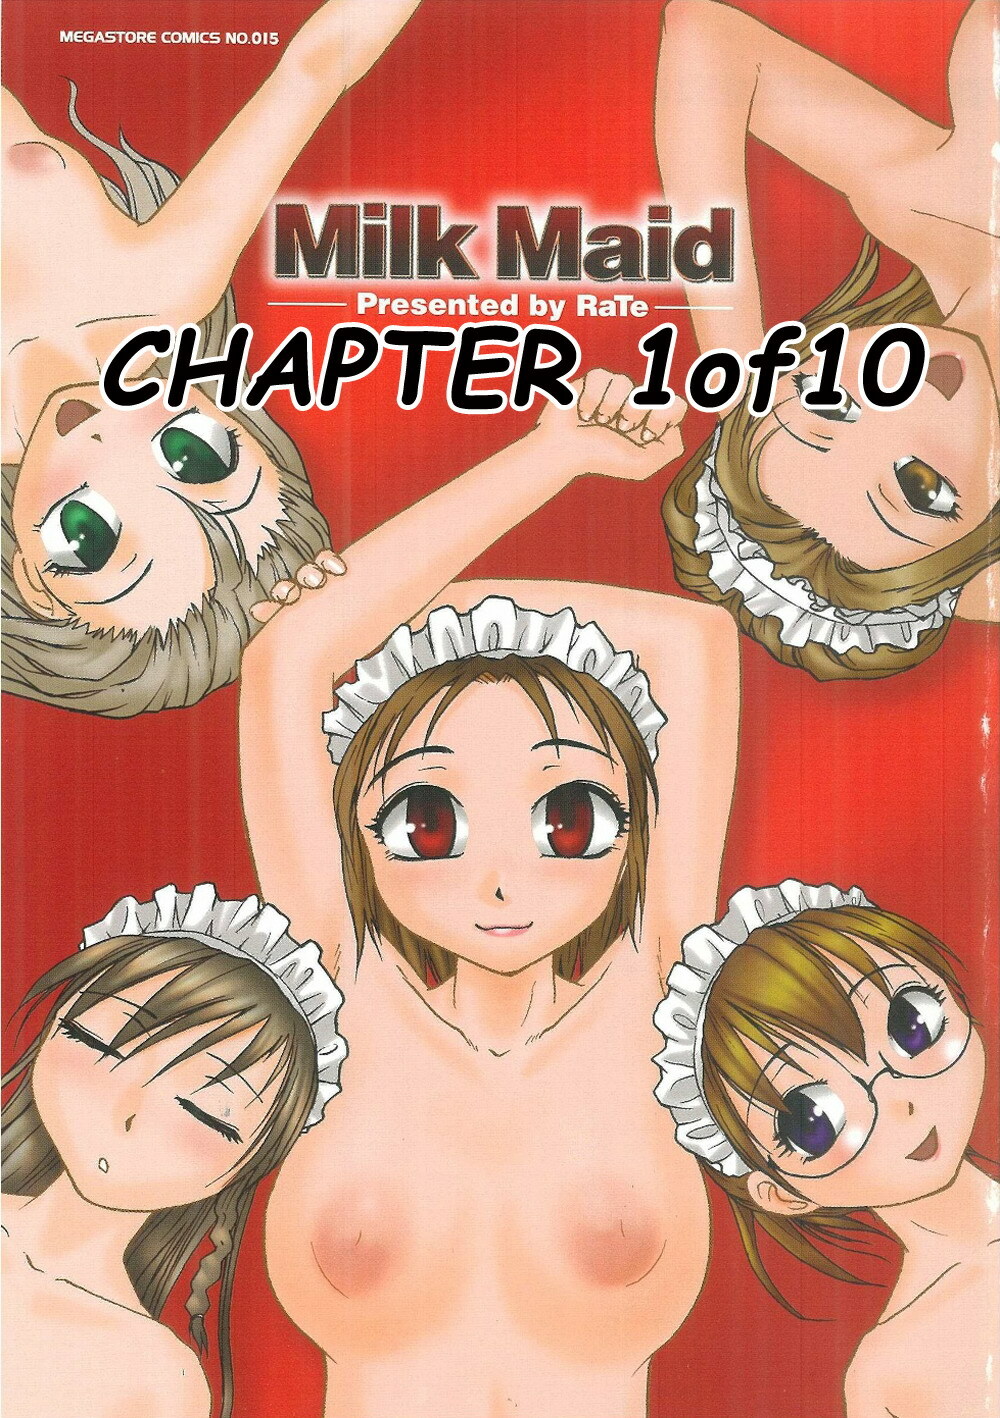 [RaTe] Milk Maid [English] [Stecaz] page 4 full